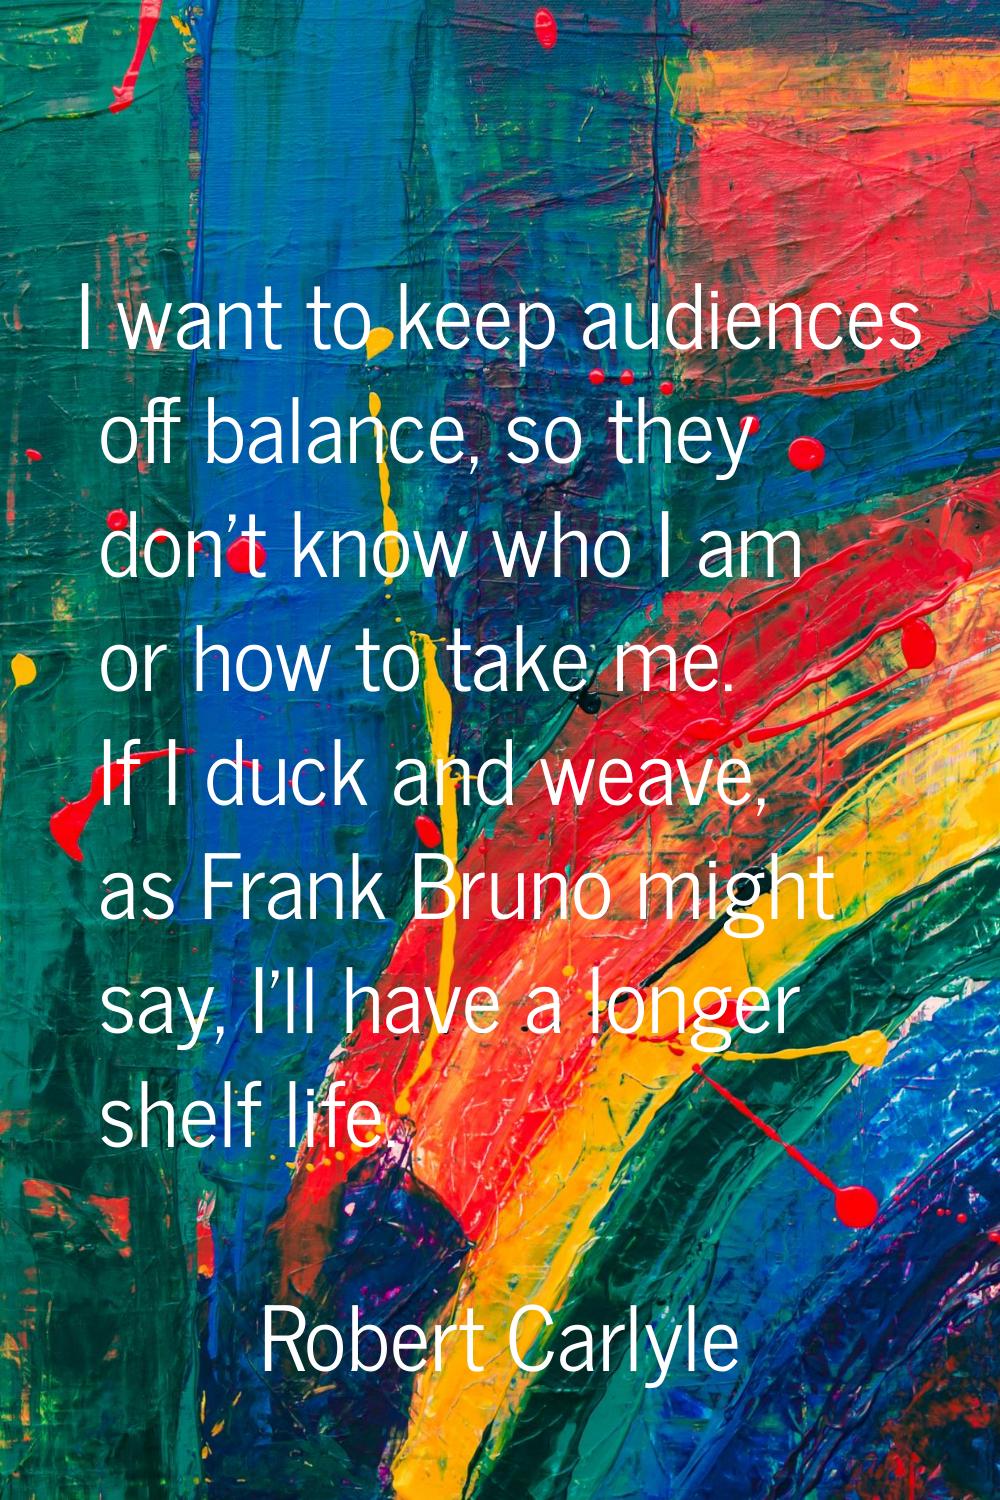 I want to keep audiences off balance, so they don't know who I am or how to take me. If I duck and 